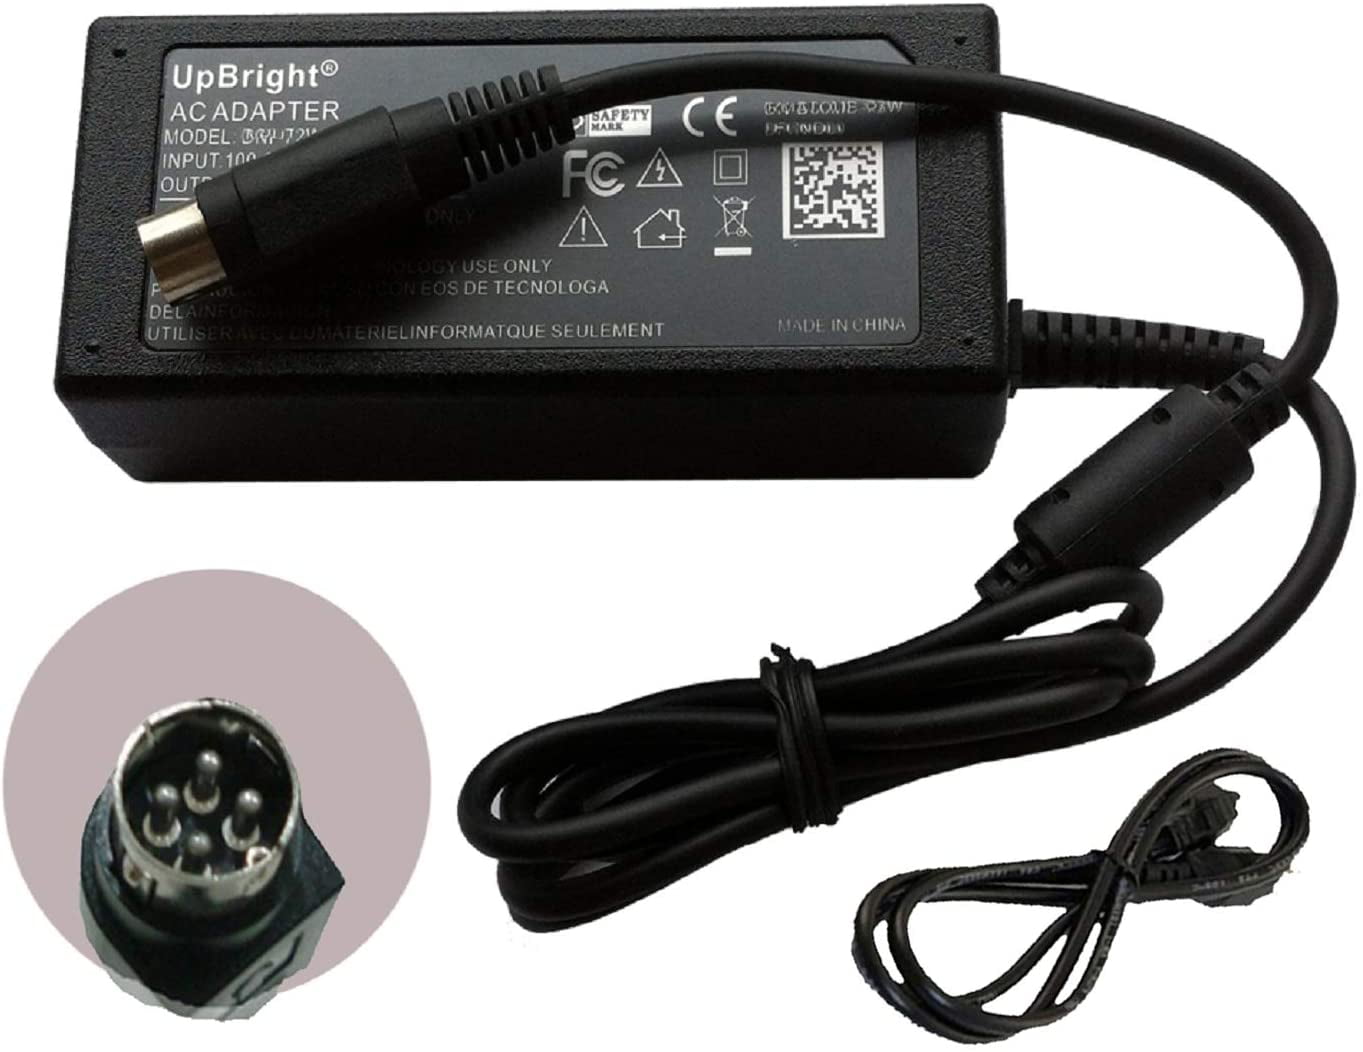 NEW AC Adapter For Delta ADP-180NB BC ADP-180NBBC Charger DC Power Supply Cord 